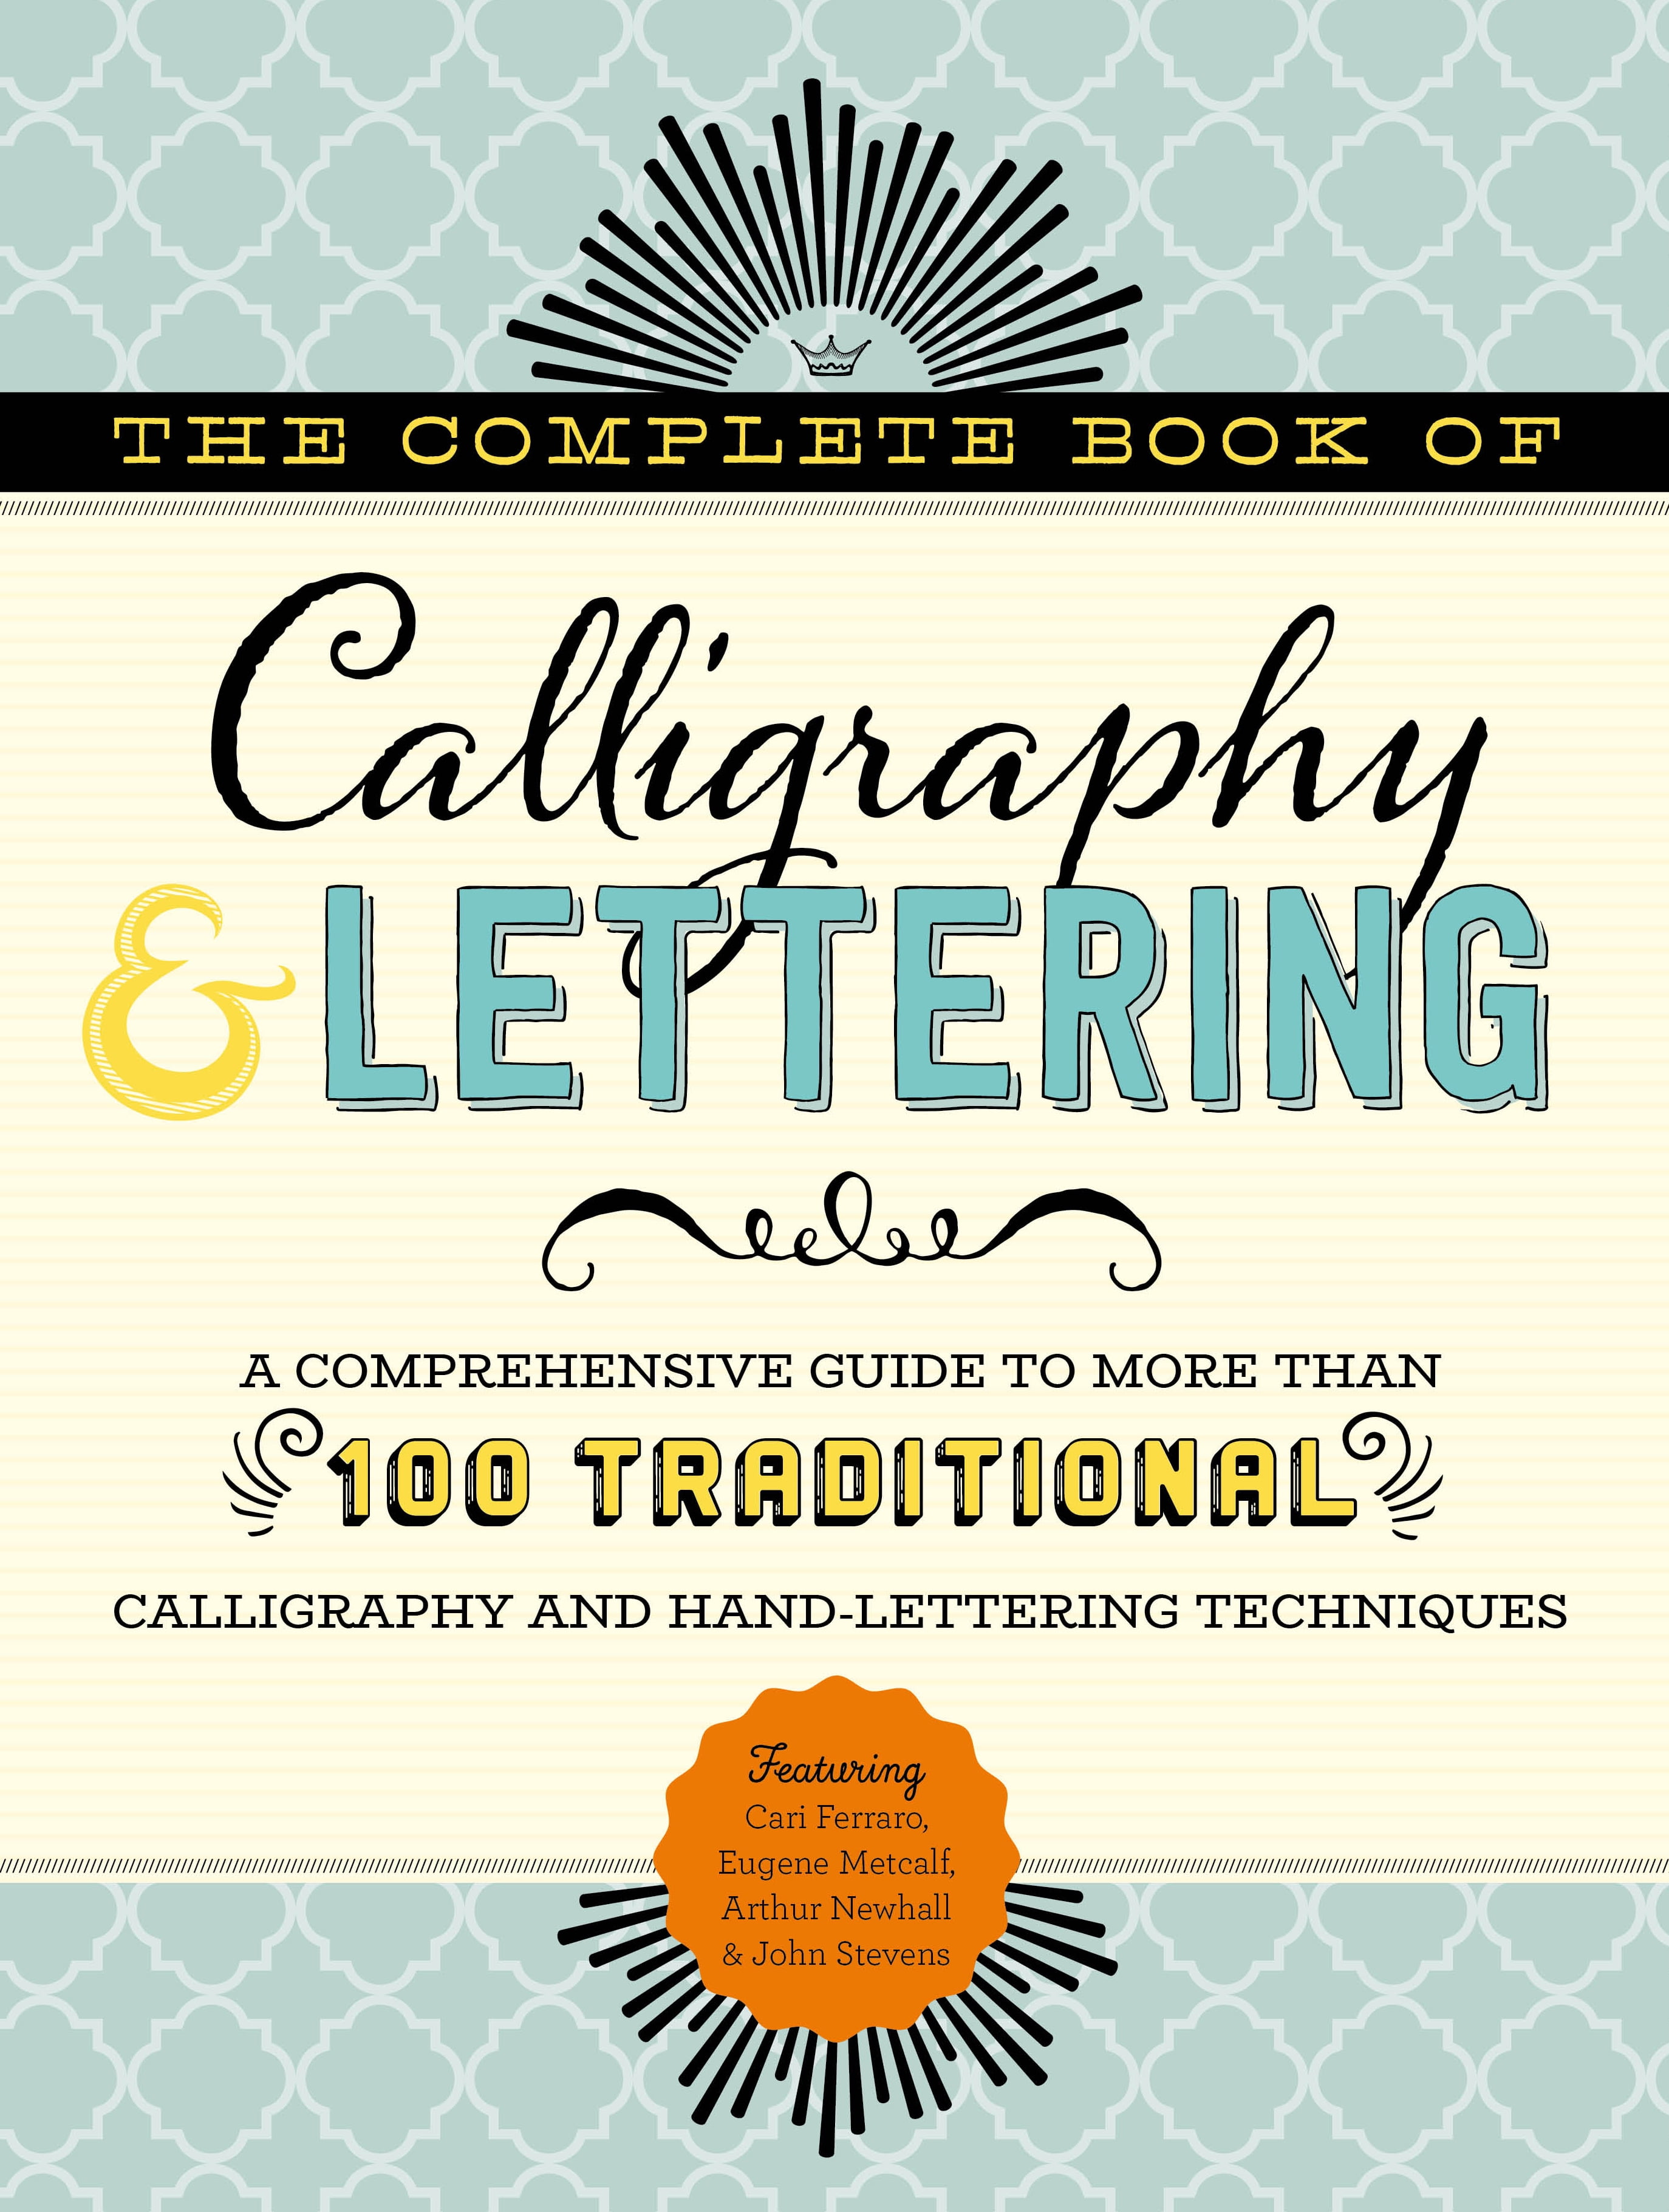 The-Complete-Book-of-Calligraphy--Lettering-A-comprehensive-guide-to-more-than-100-traditional-calligraphy-and-handlettering-techniques